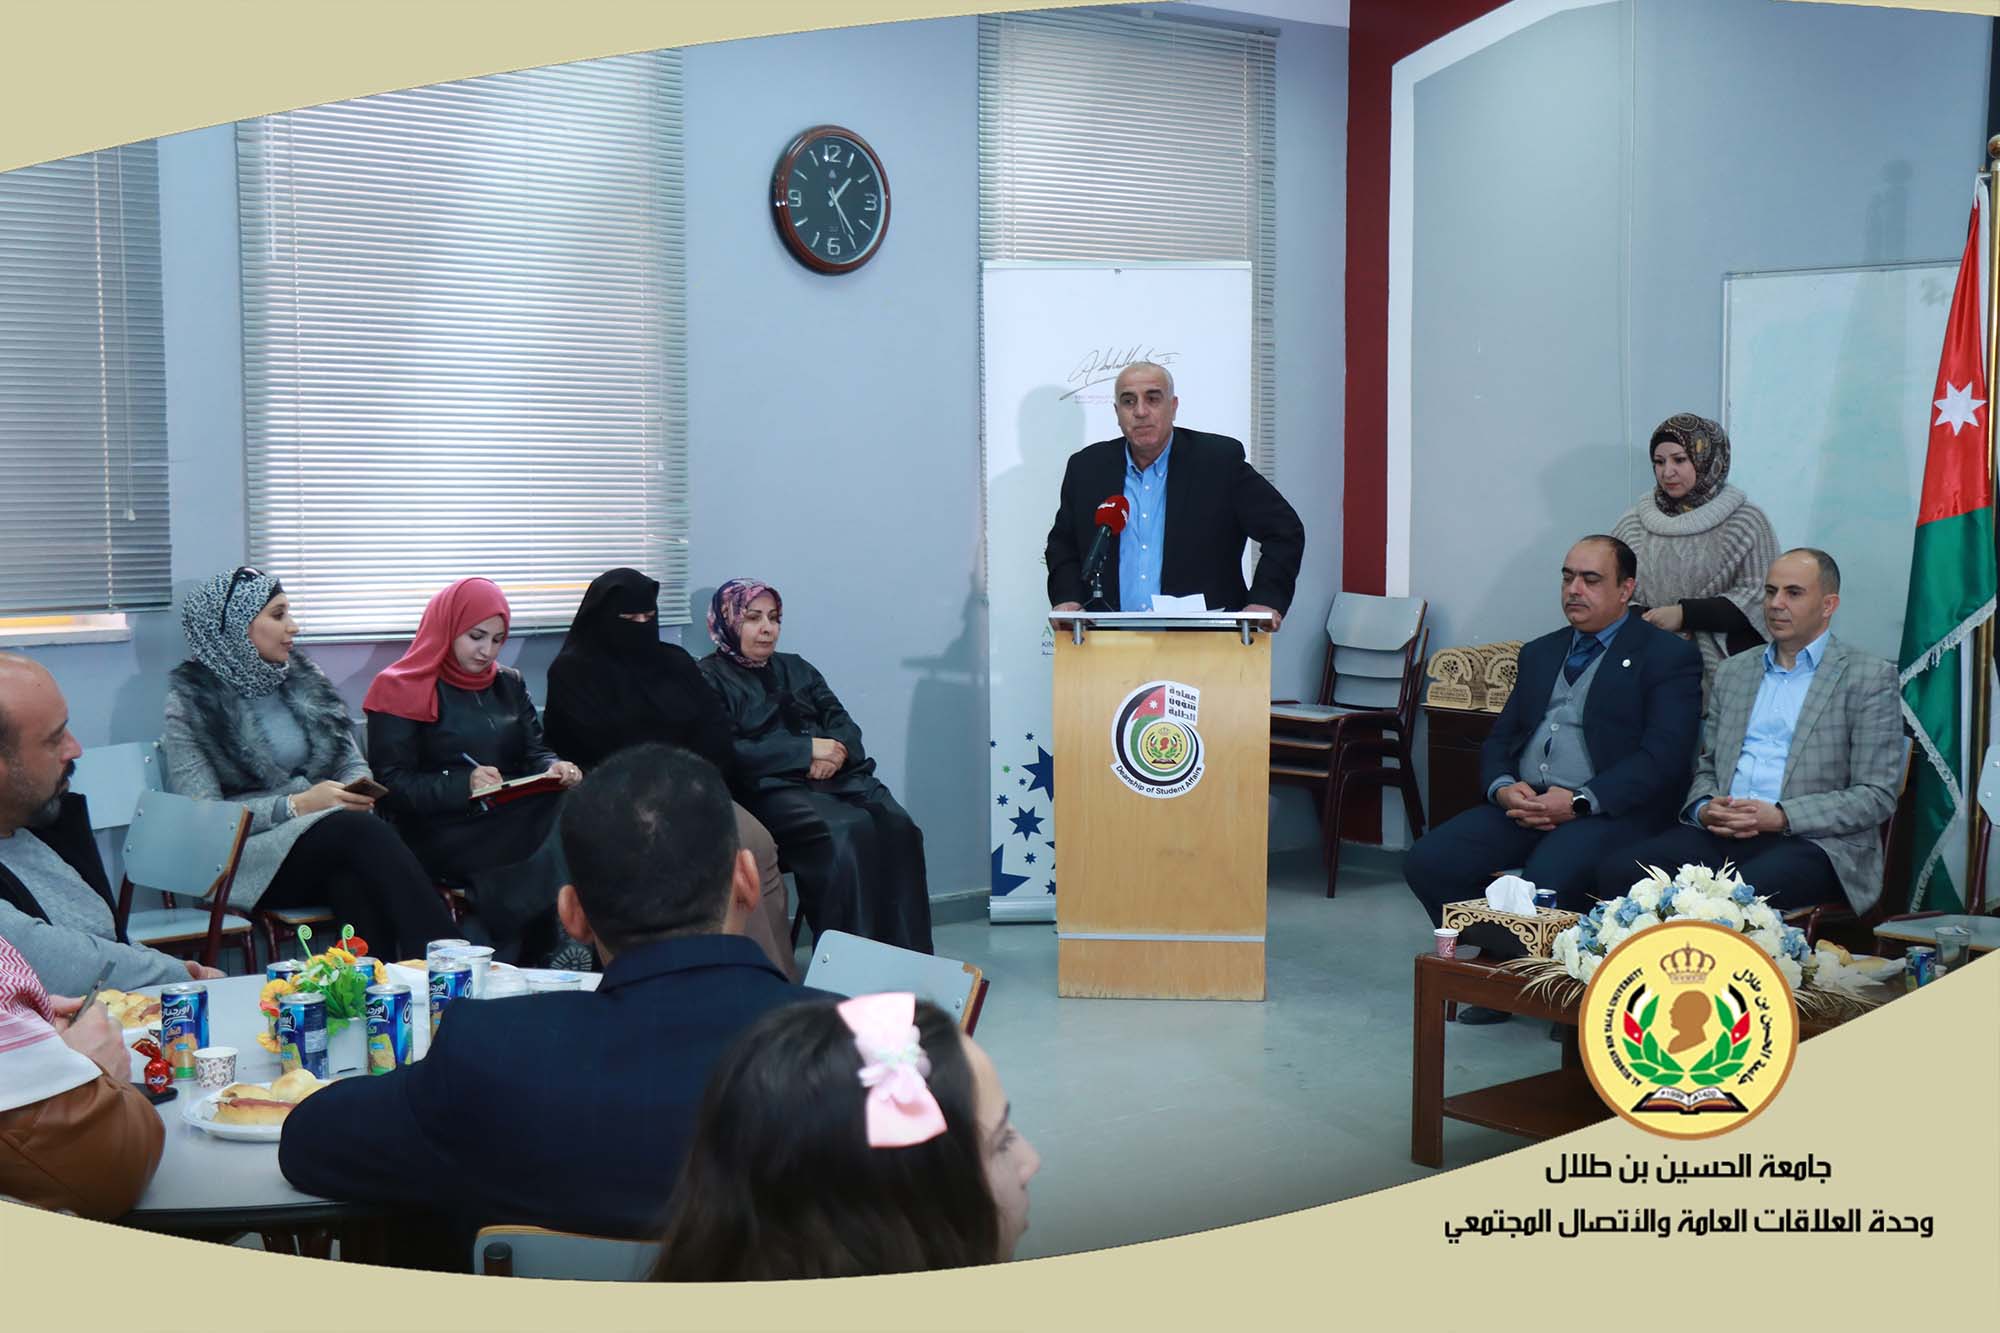 A forum for the directors of public schools in the Ma'an region who are graduates of Al-Hussein Bin Talal University at the university.